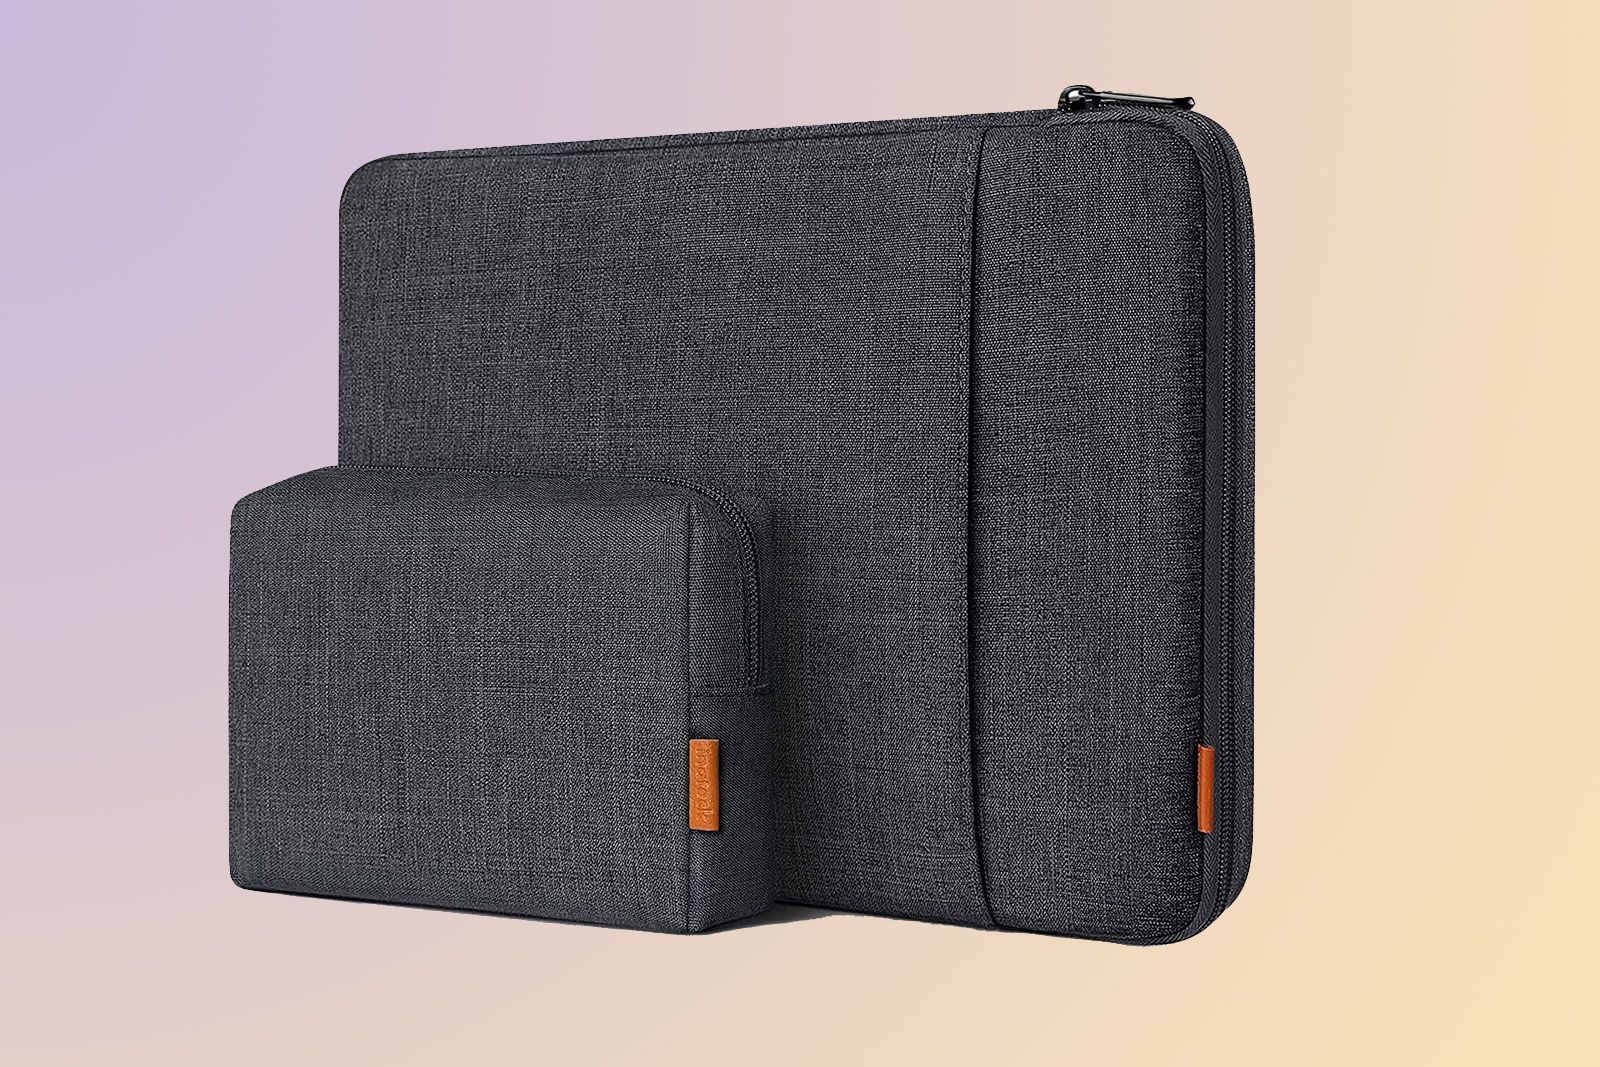 13 Laptop Cases That Upgrade You to Boss Status